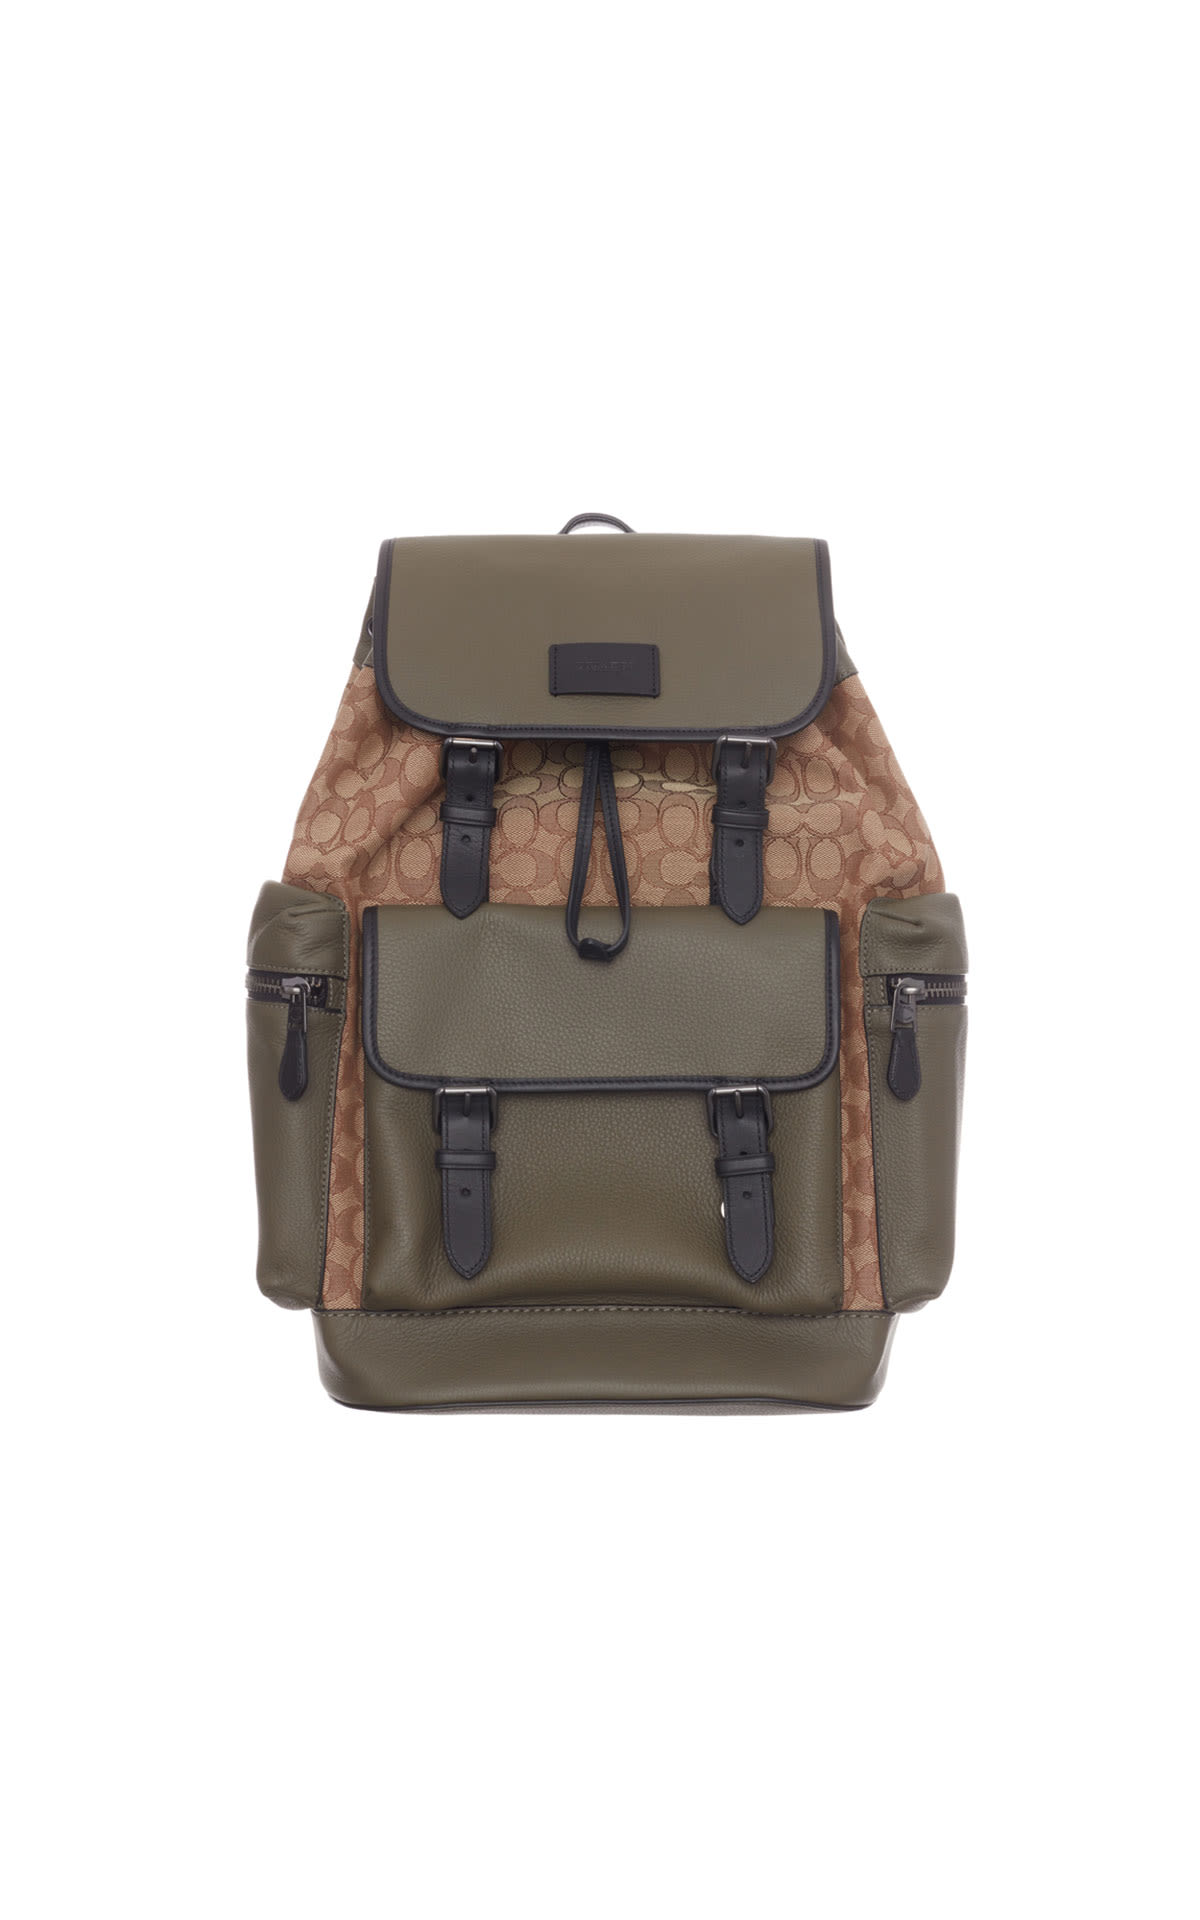 Coach Sports backpack from Bicester Village